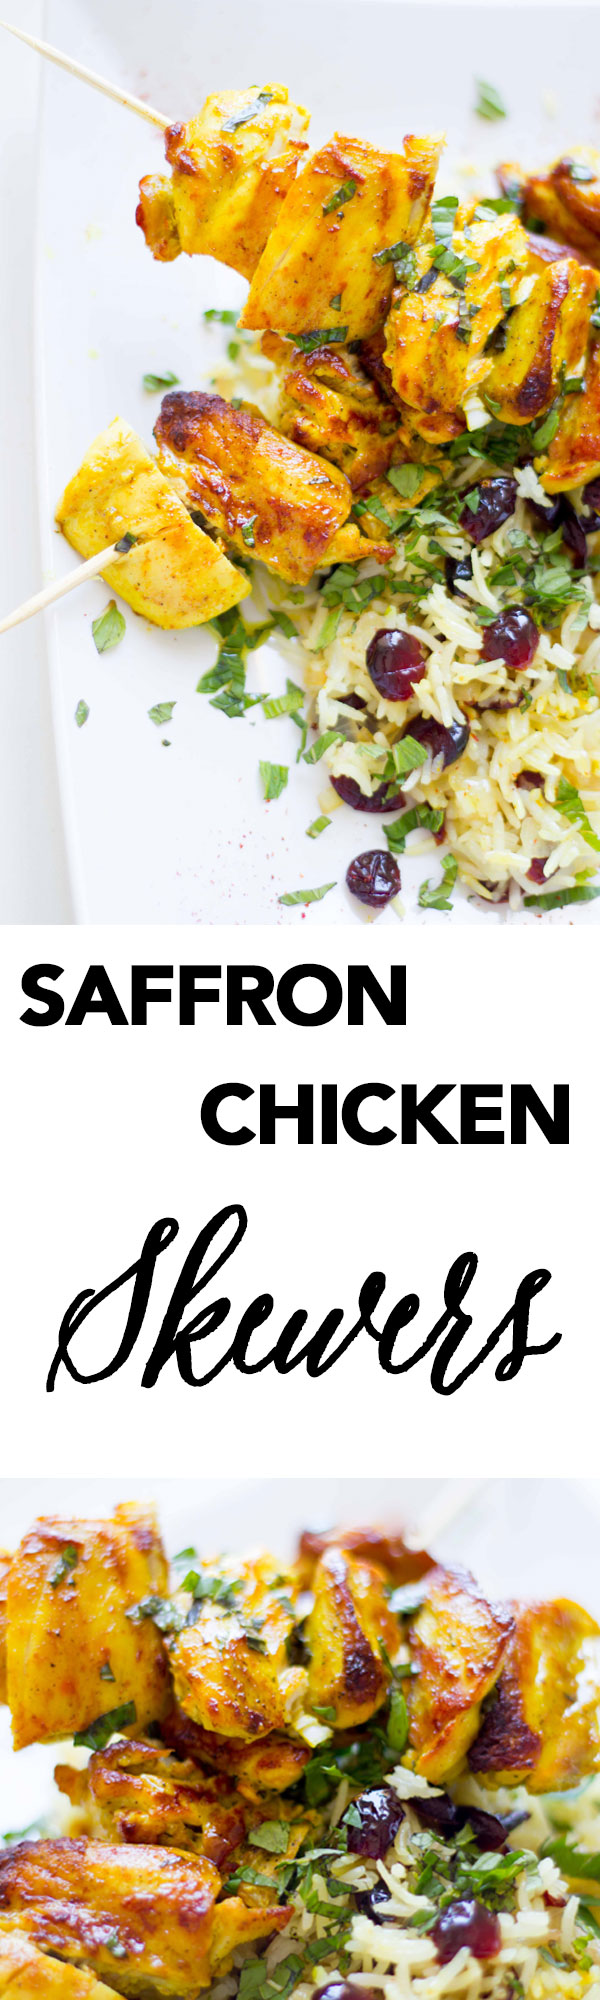 These Persian chicken saffron skewers are a quick and easy to make meal you can pair with just about anything. Eat over rice, in a sandwich, or over your favorite salad.